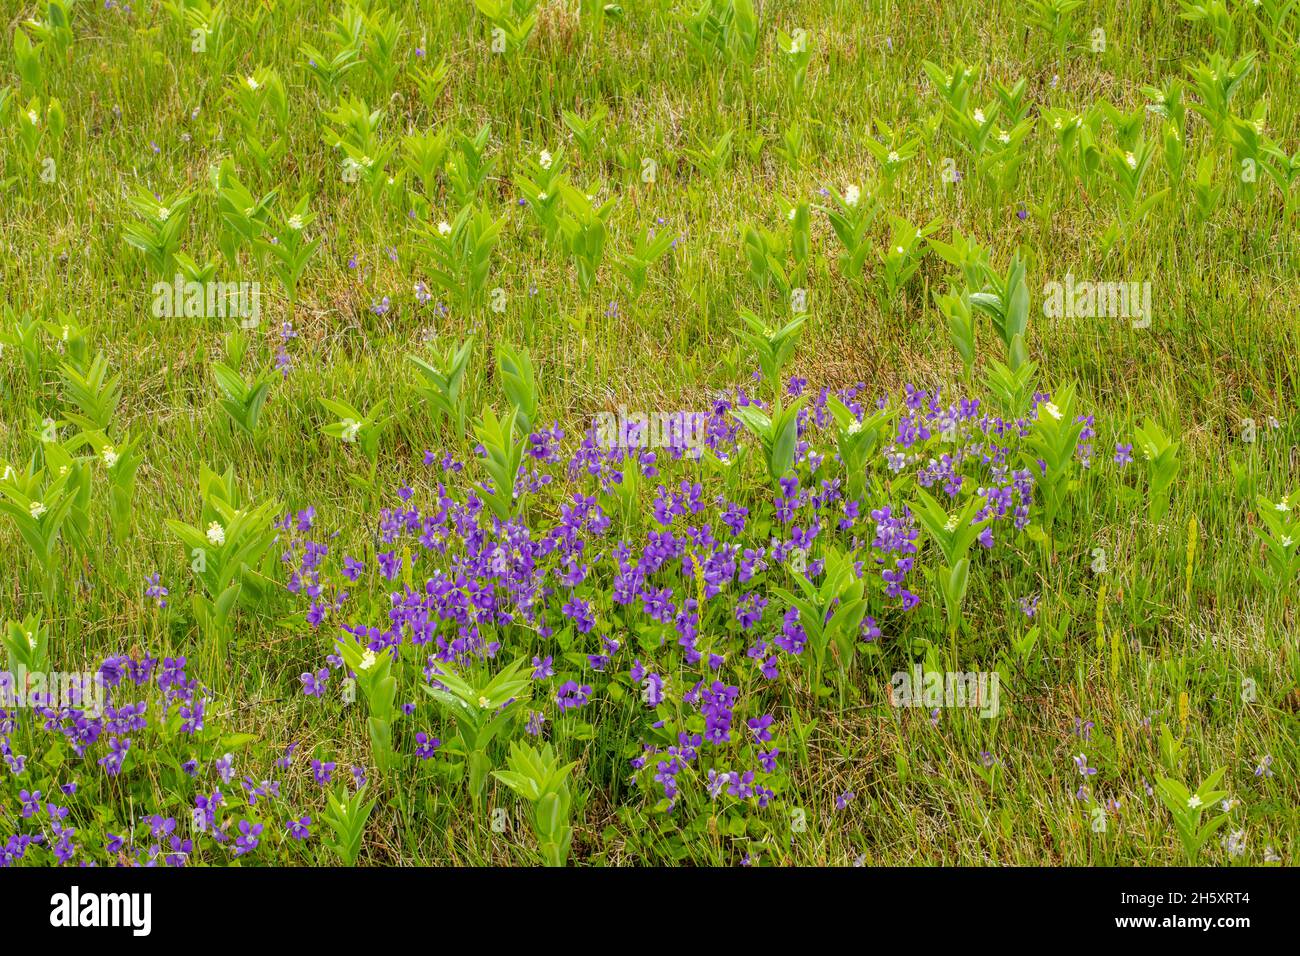 Violets and false Solomon's seal (Maianthemum racemosum), blooming in a meadow, Sheaves Cove, Newfoundland and Labrador NL, Canada Stock Photo